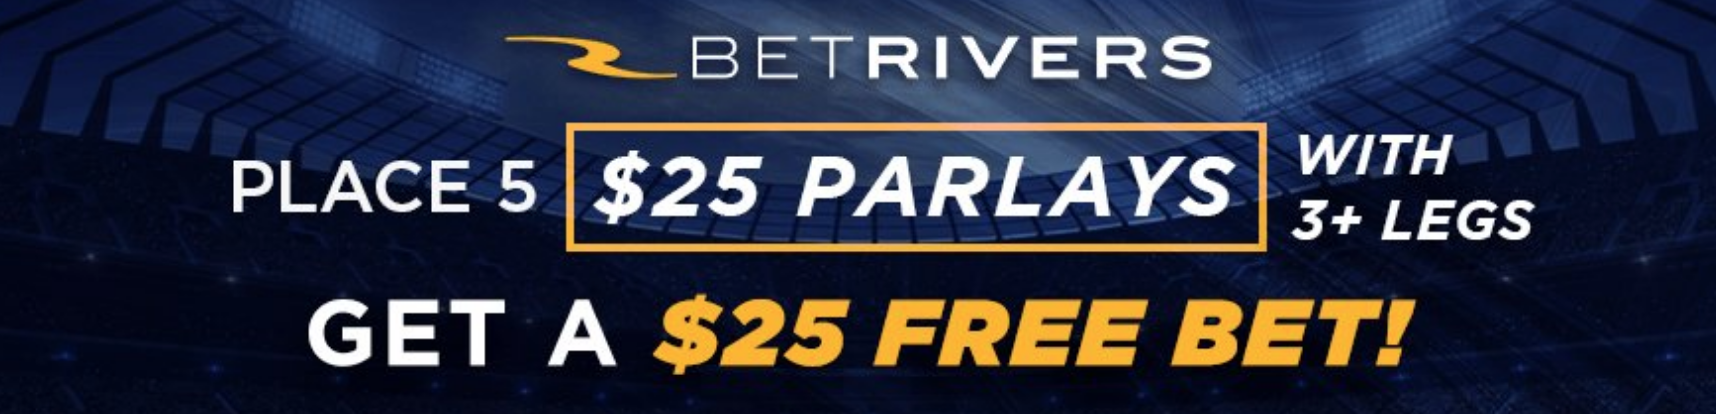 betrivers special offers